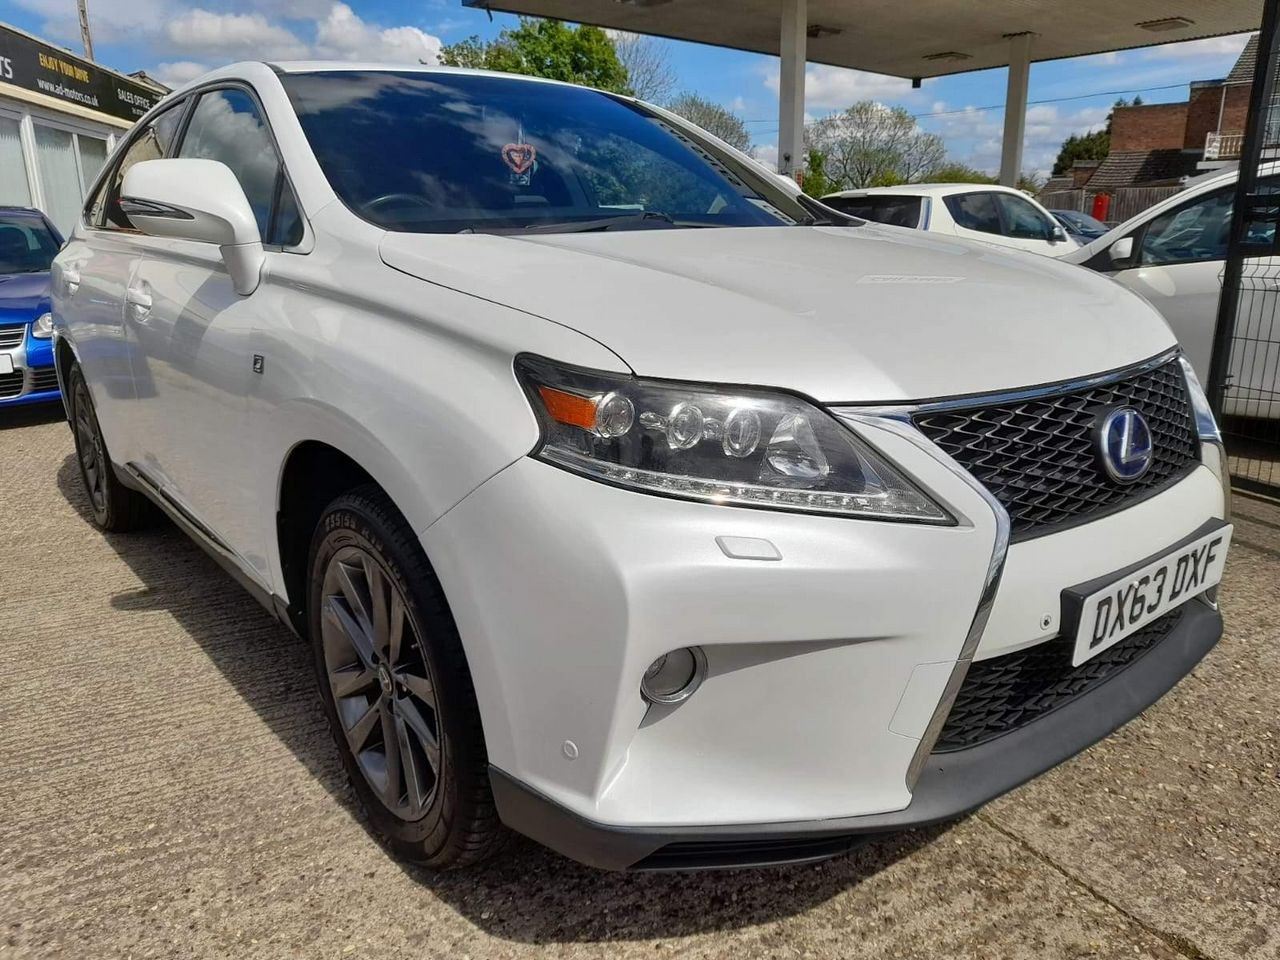 2013 Lexus RX 3.5 450h V6 F Sport SUV 5dr Petrol Hybrid CVT 4WD Euro 5 (s/s) (299 ps) - Picture 13 of 53